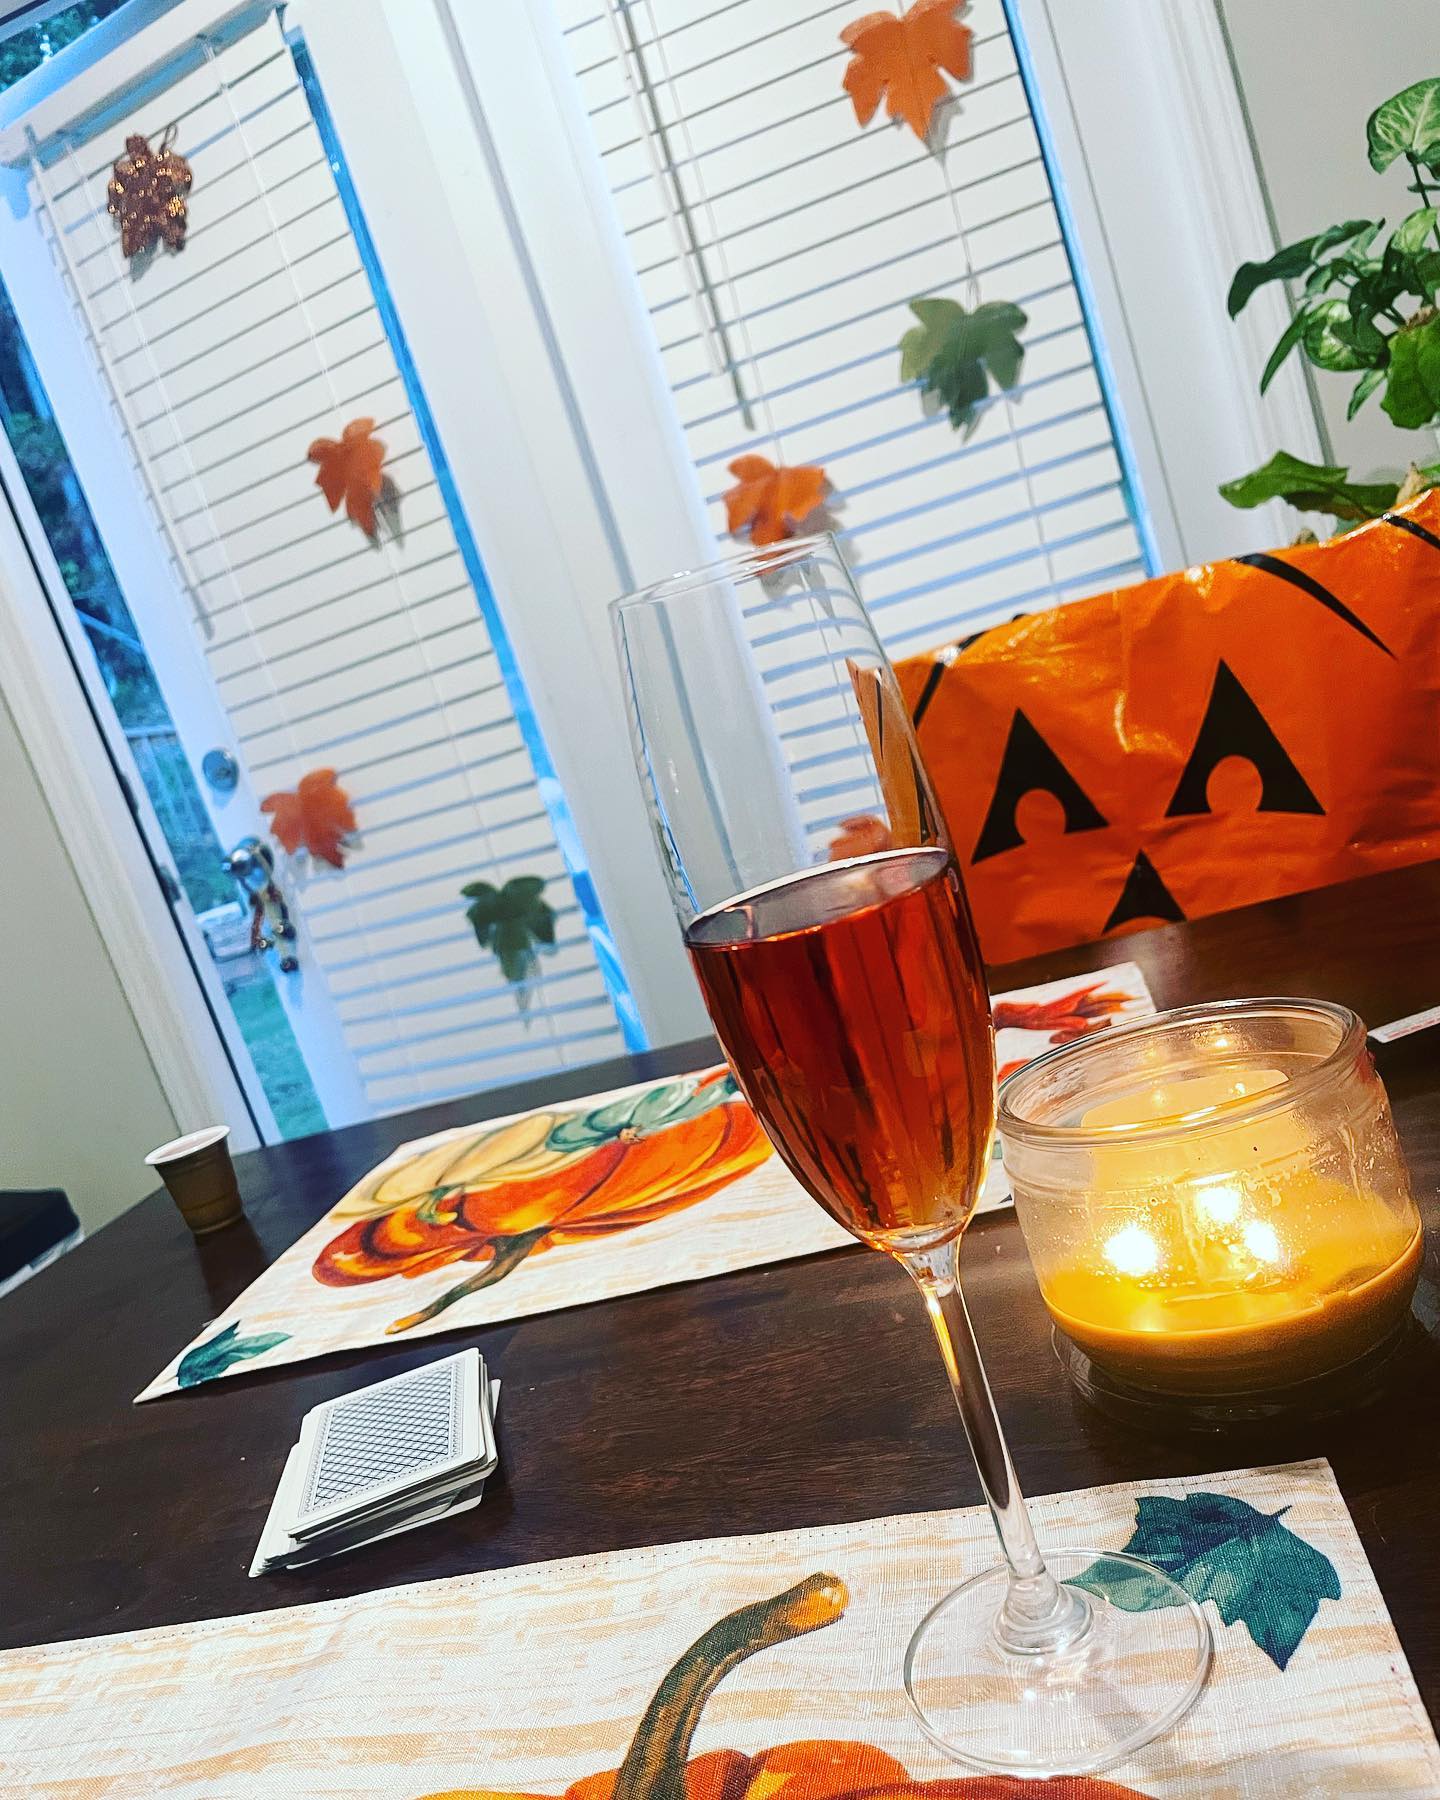 Fall Evenings.
.
.
.
.
.
.
.
.
.
.
#Wine #Fall #FallVibes #Cards #Relax #Cool…